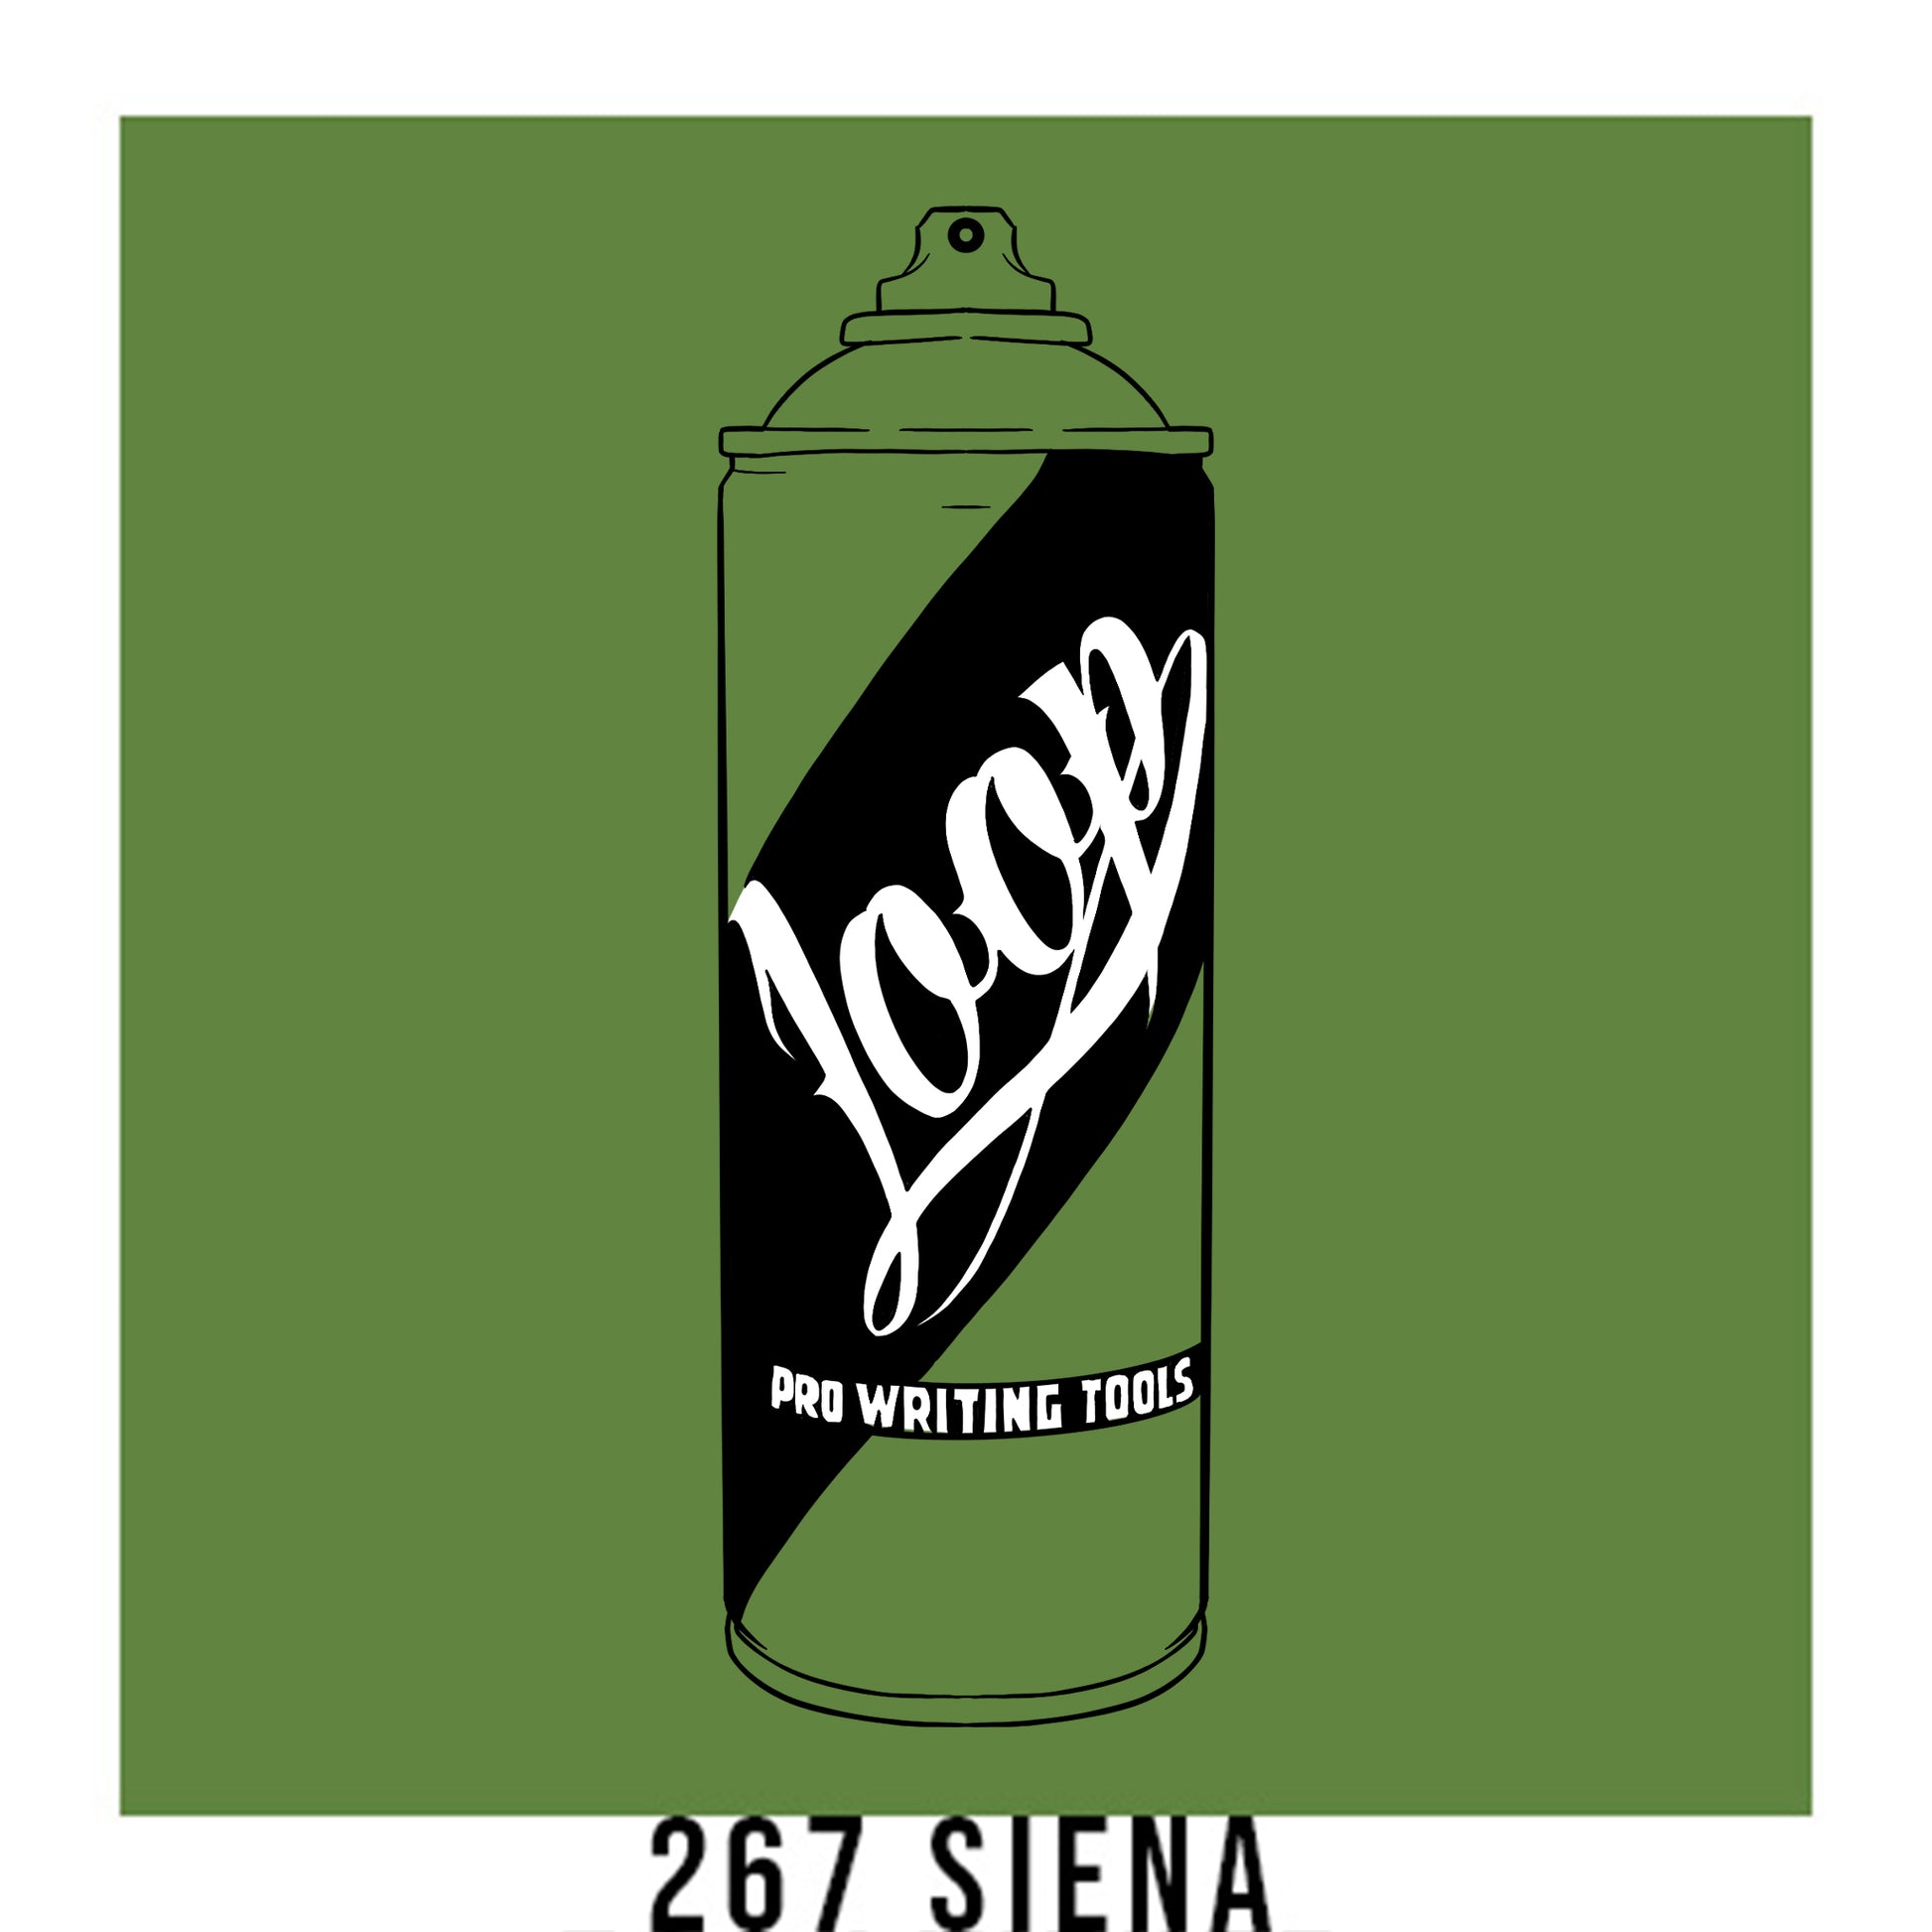 A black outline drawing of a olive spray paint can with the word "Loop" written on the face in script. The background is a color swatch of the same Olive with a white border with the words "267 Siena" at the bottom.